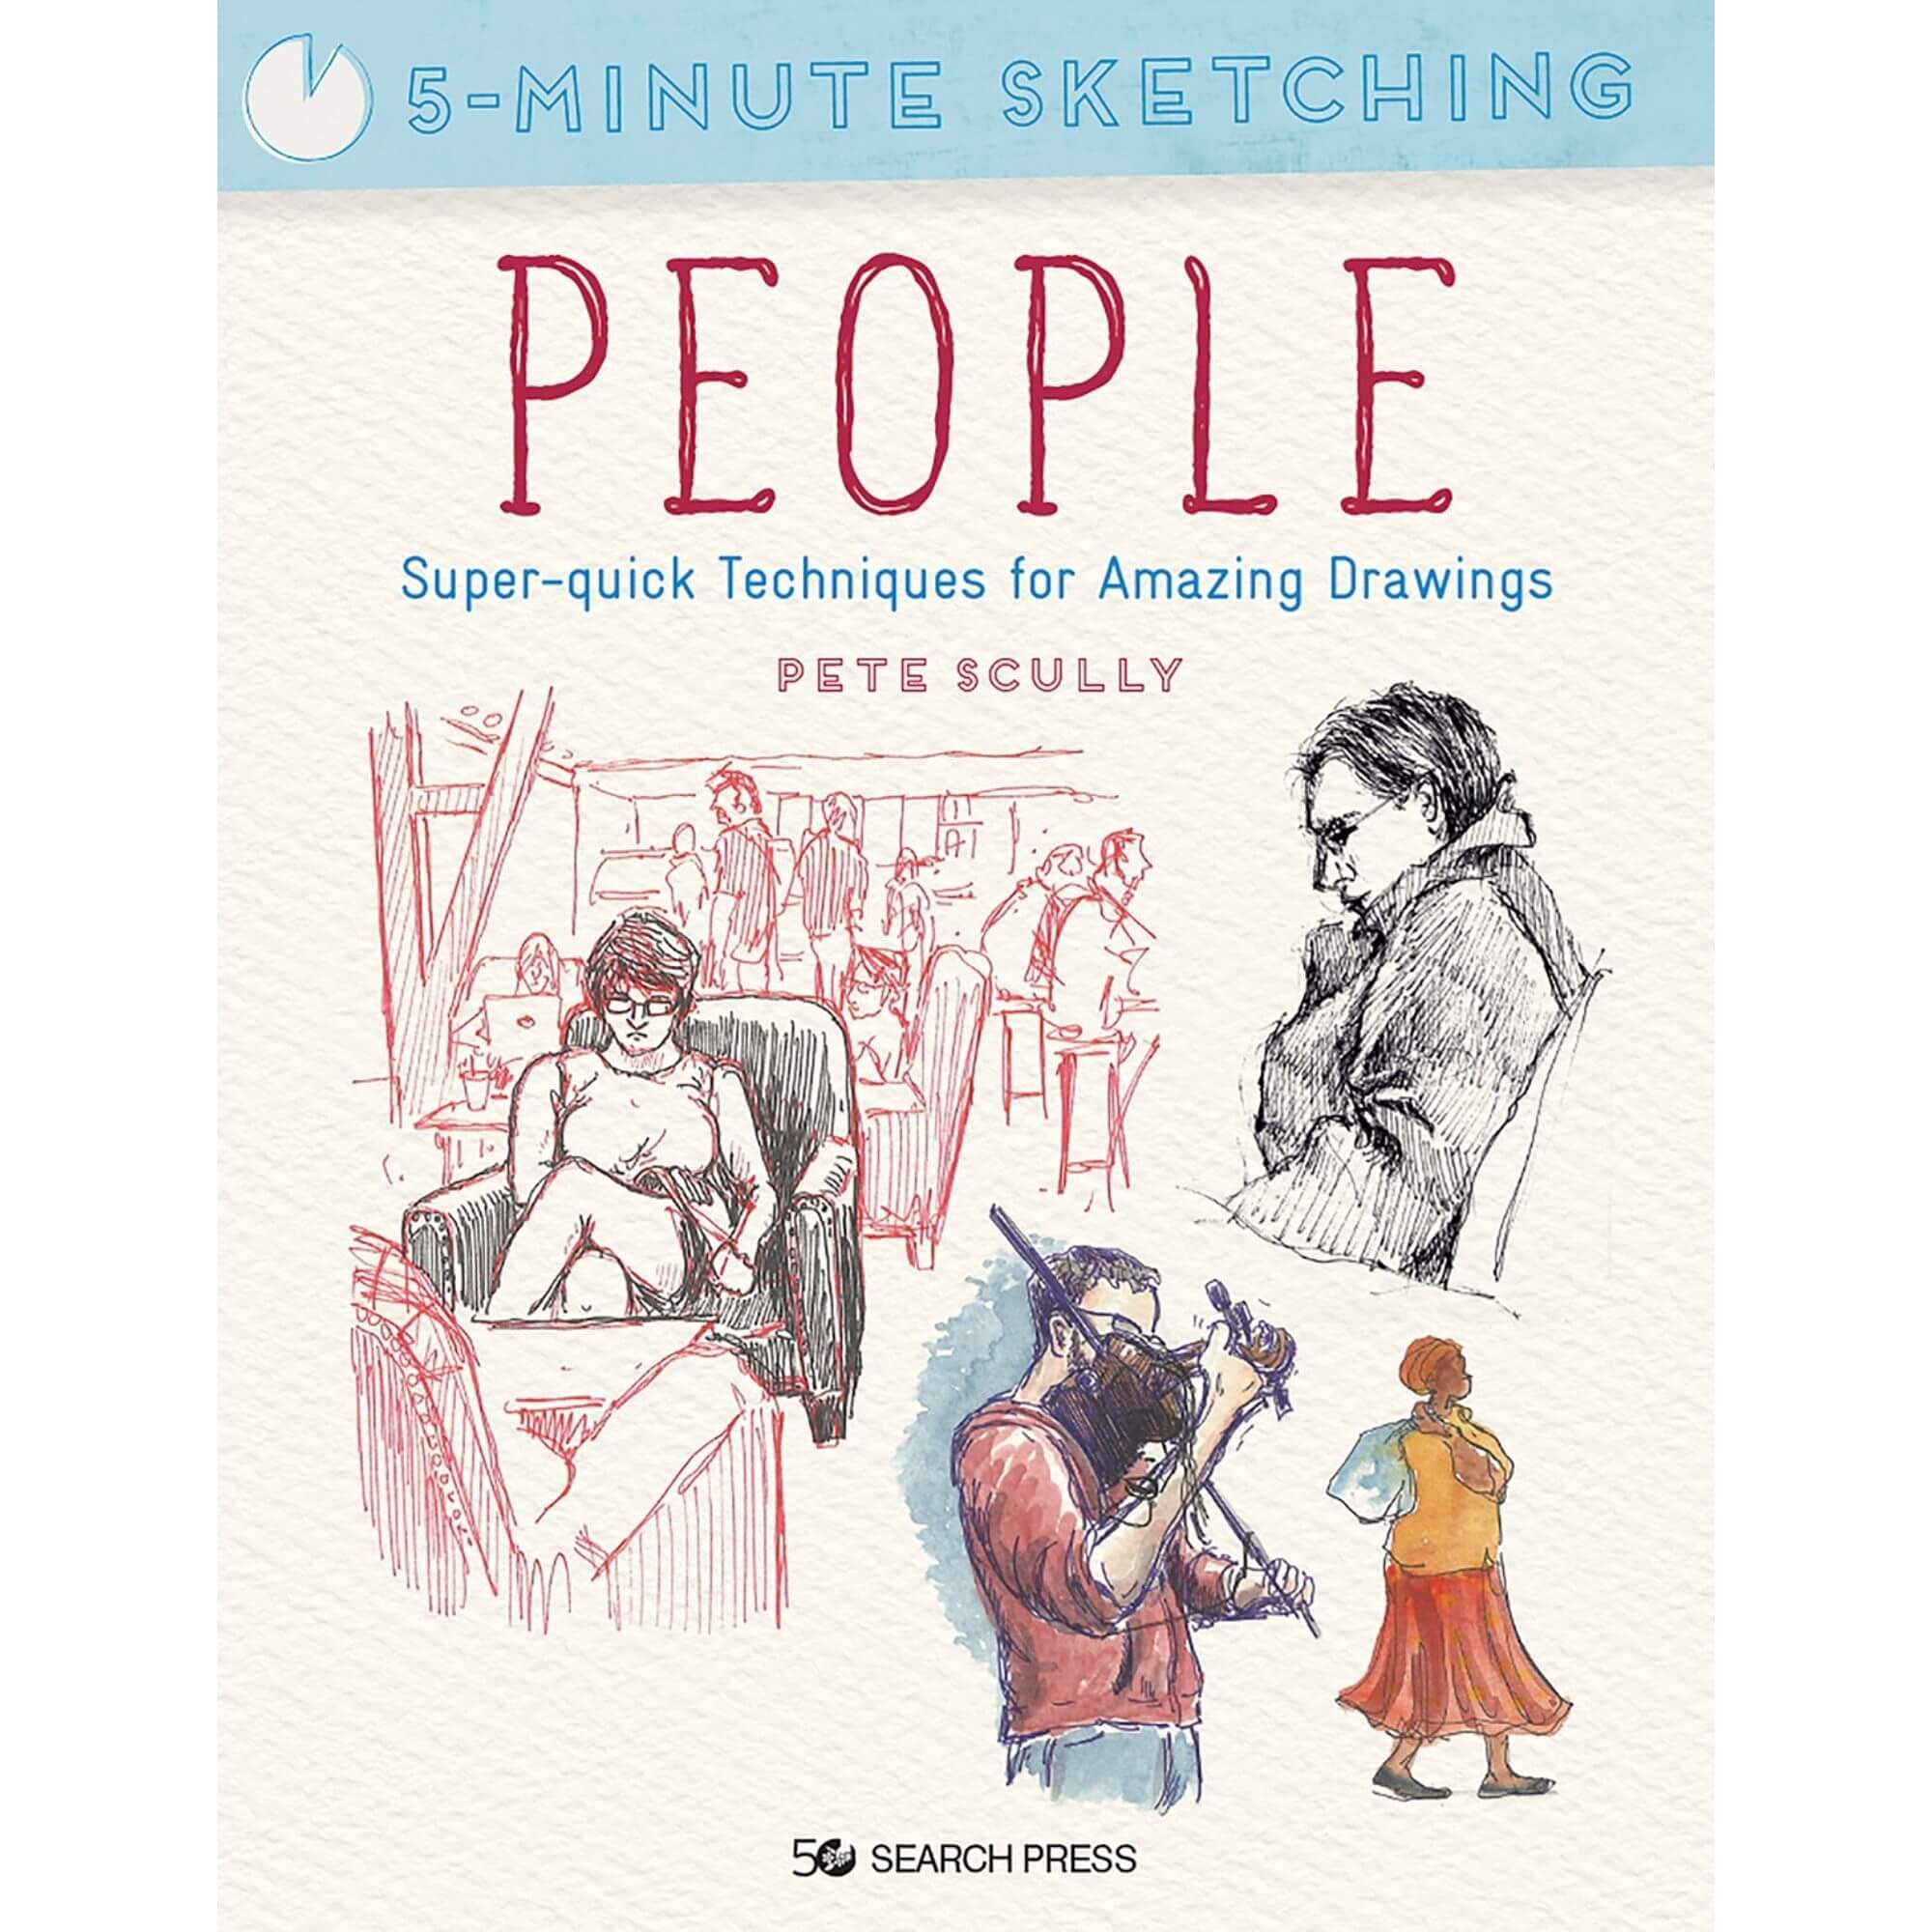 5-Minute Sketching: People by Pete Scully Book Cover